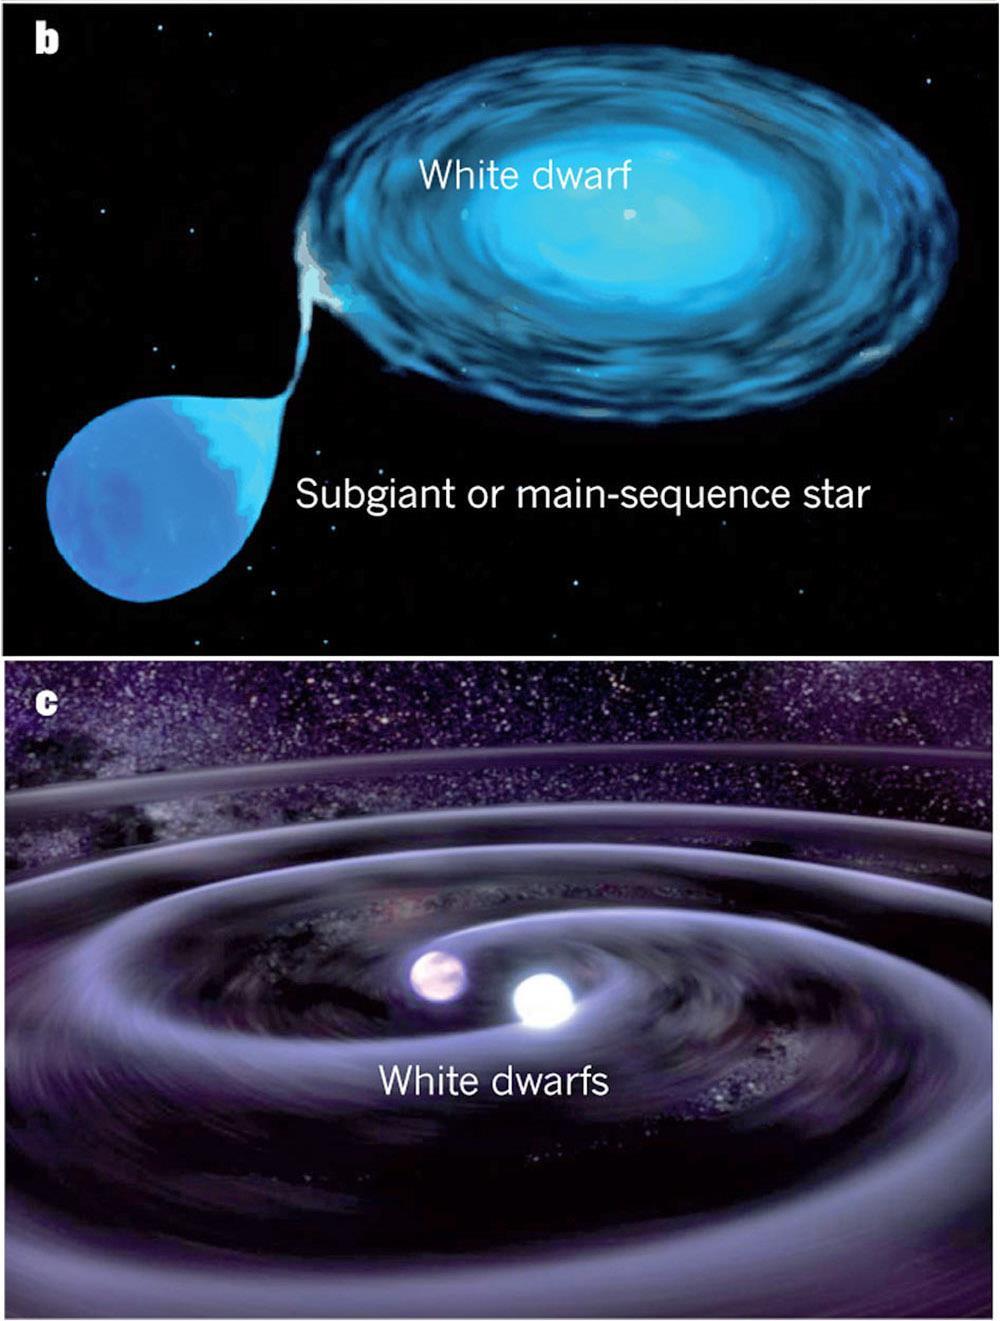 Progenitor system What is the white dwarf companion?